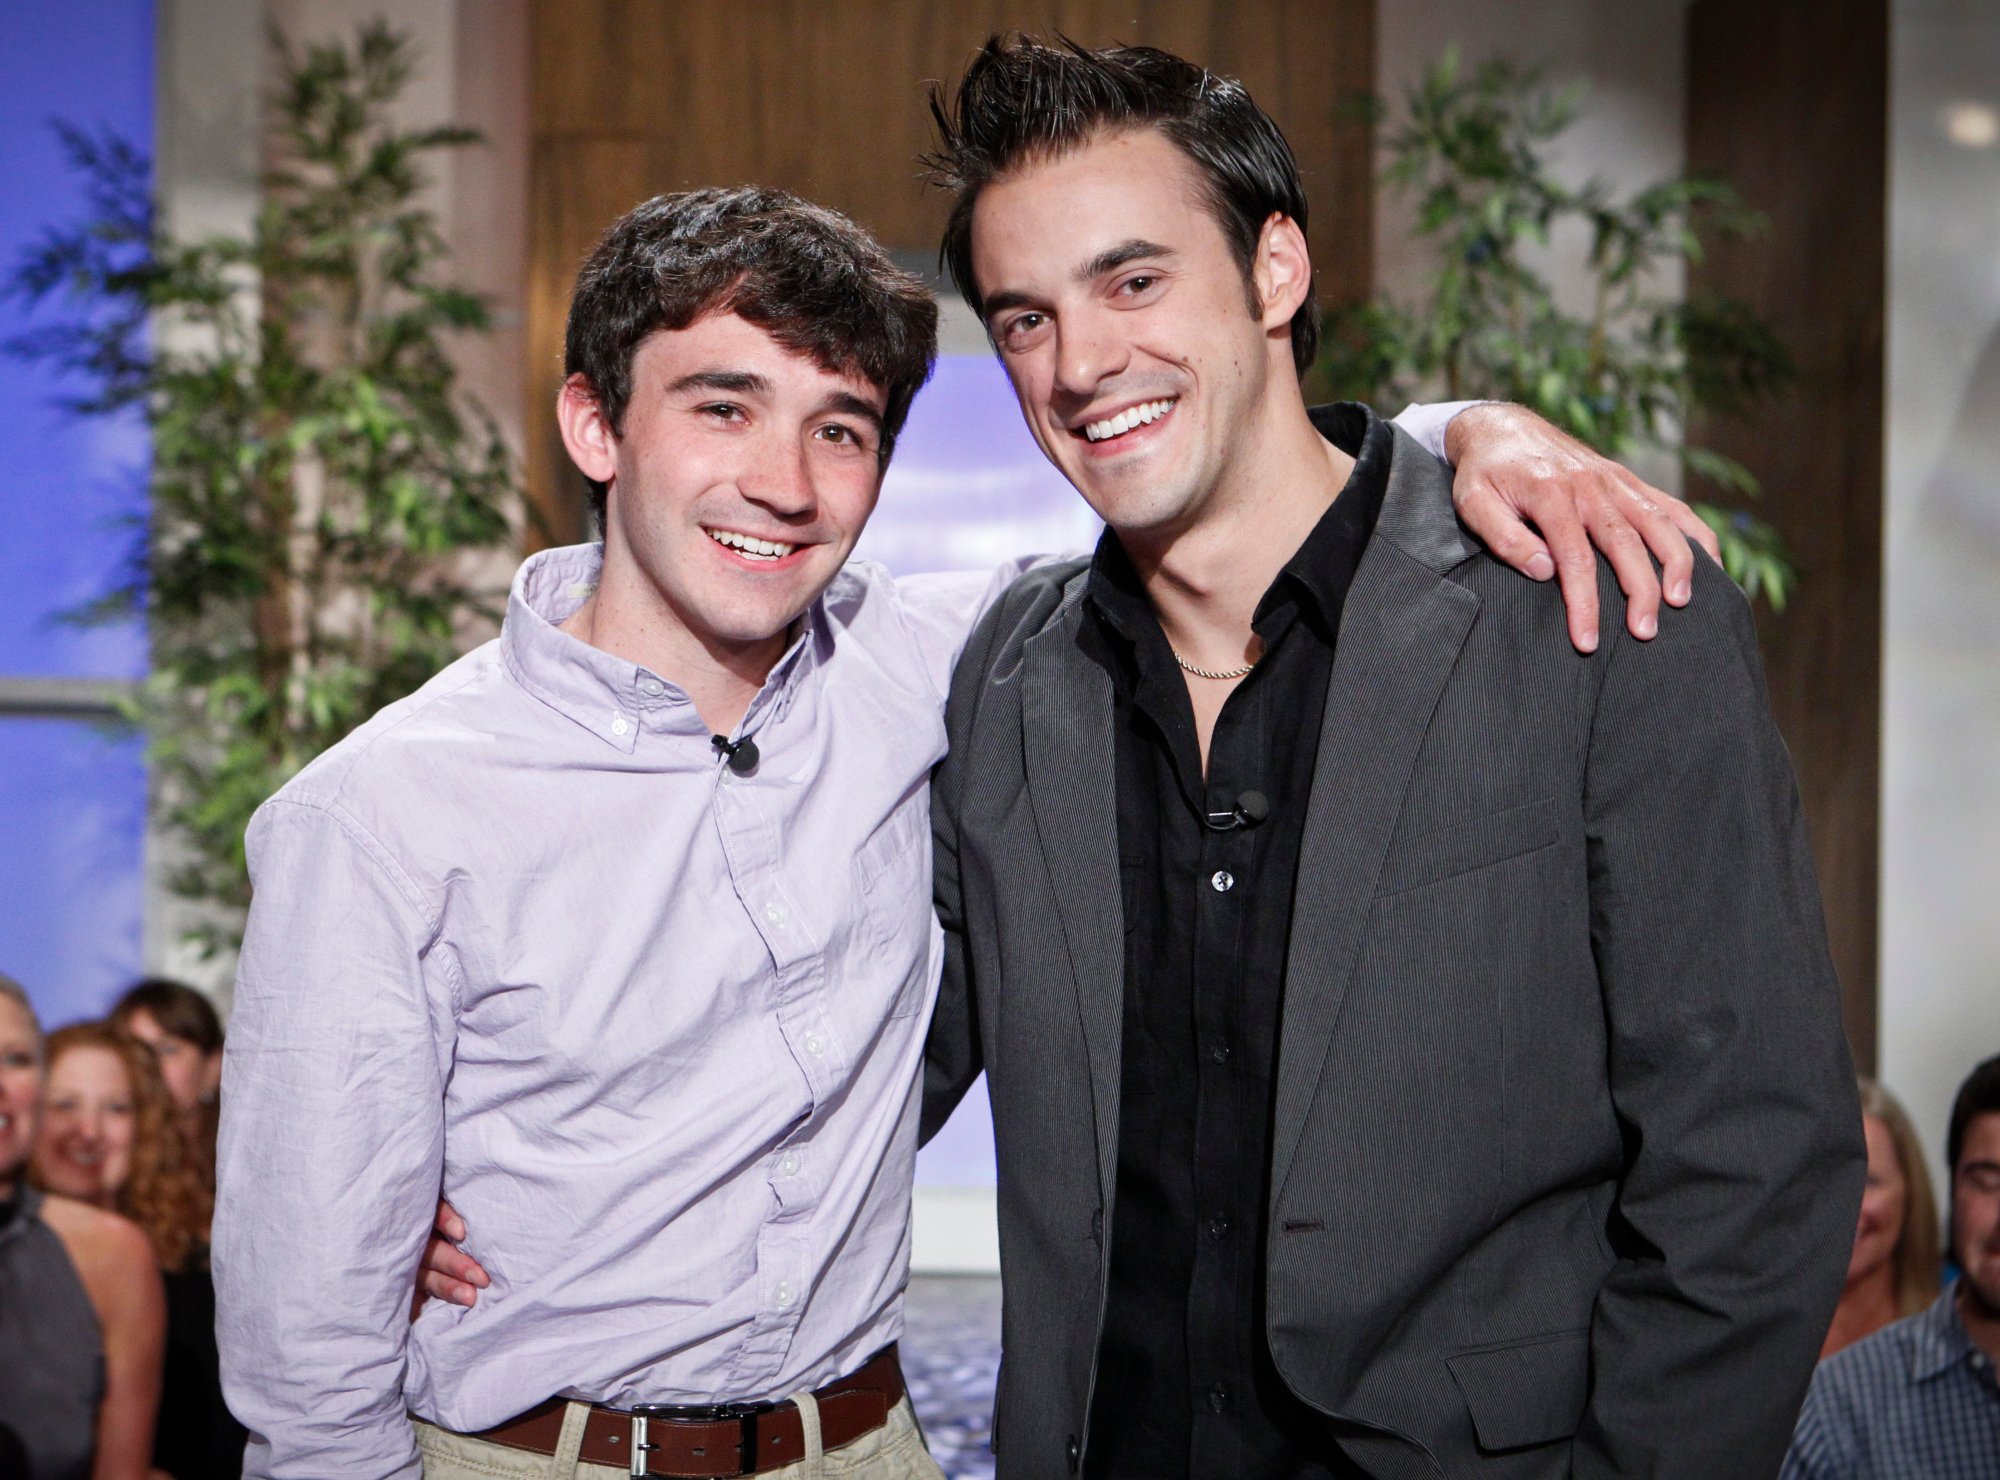 Ian Terry and Dan Gheesling, who played together on 'Big Brother' Season 14, pose for a picture together.